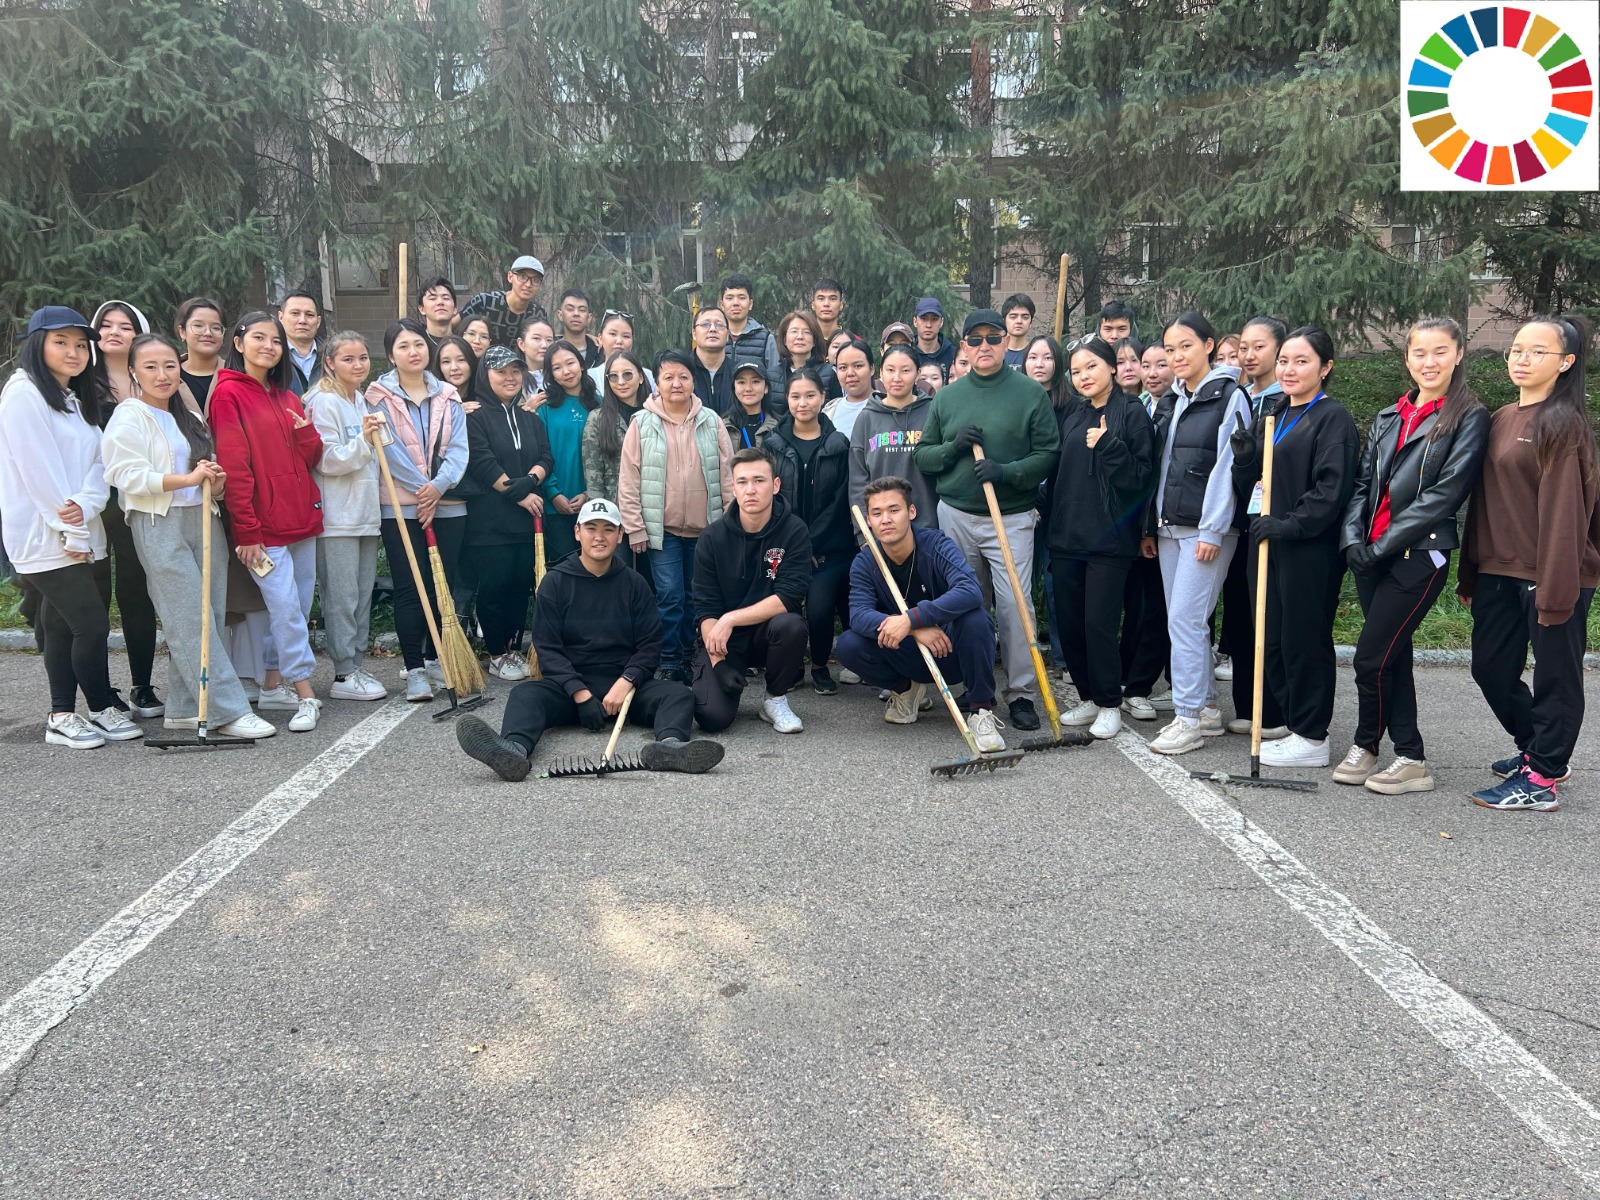 University-wide cleanup day